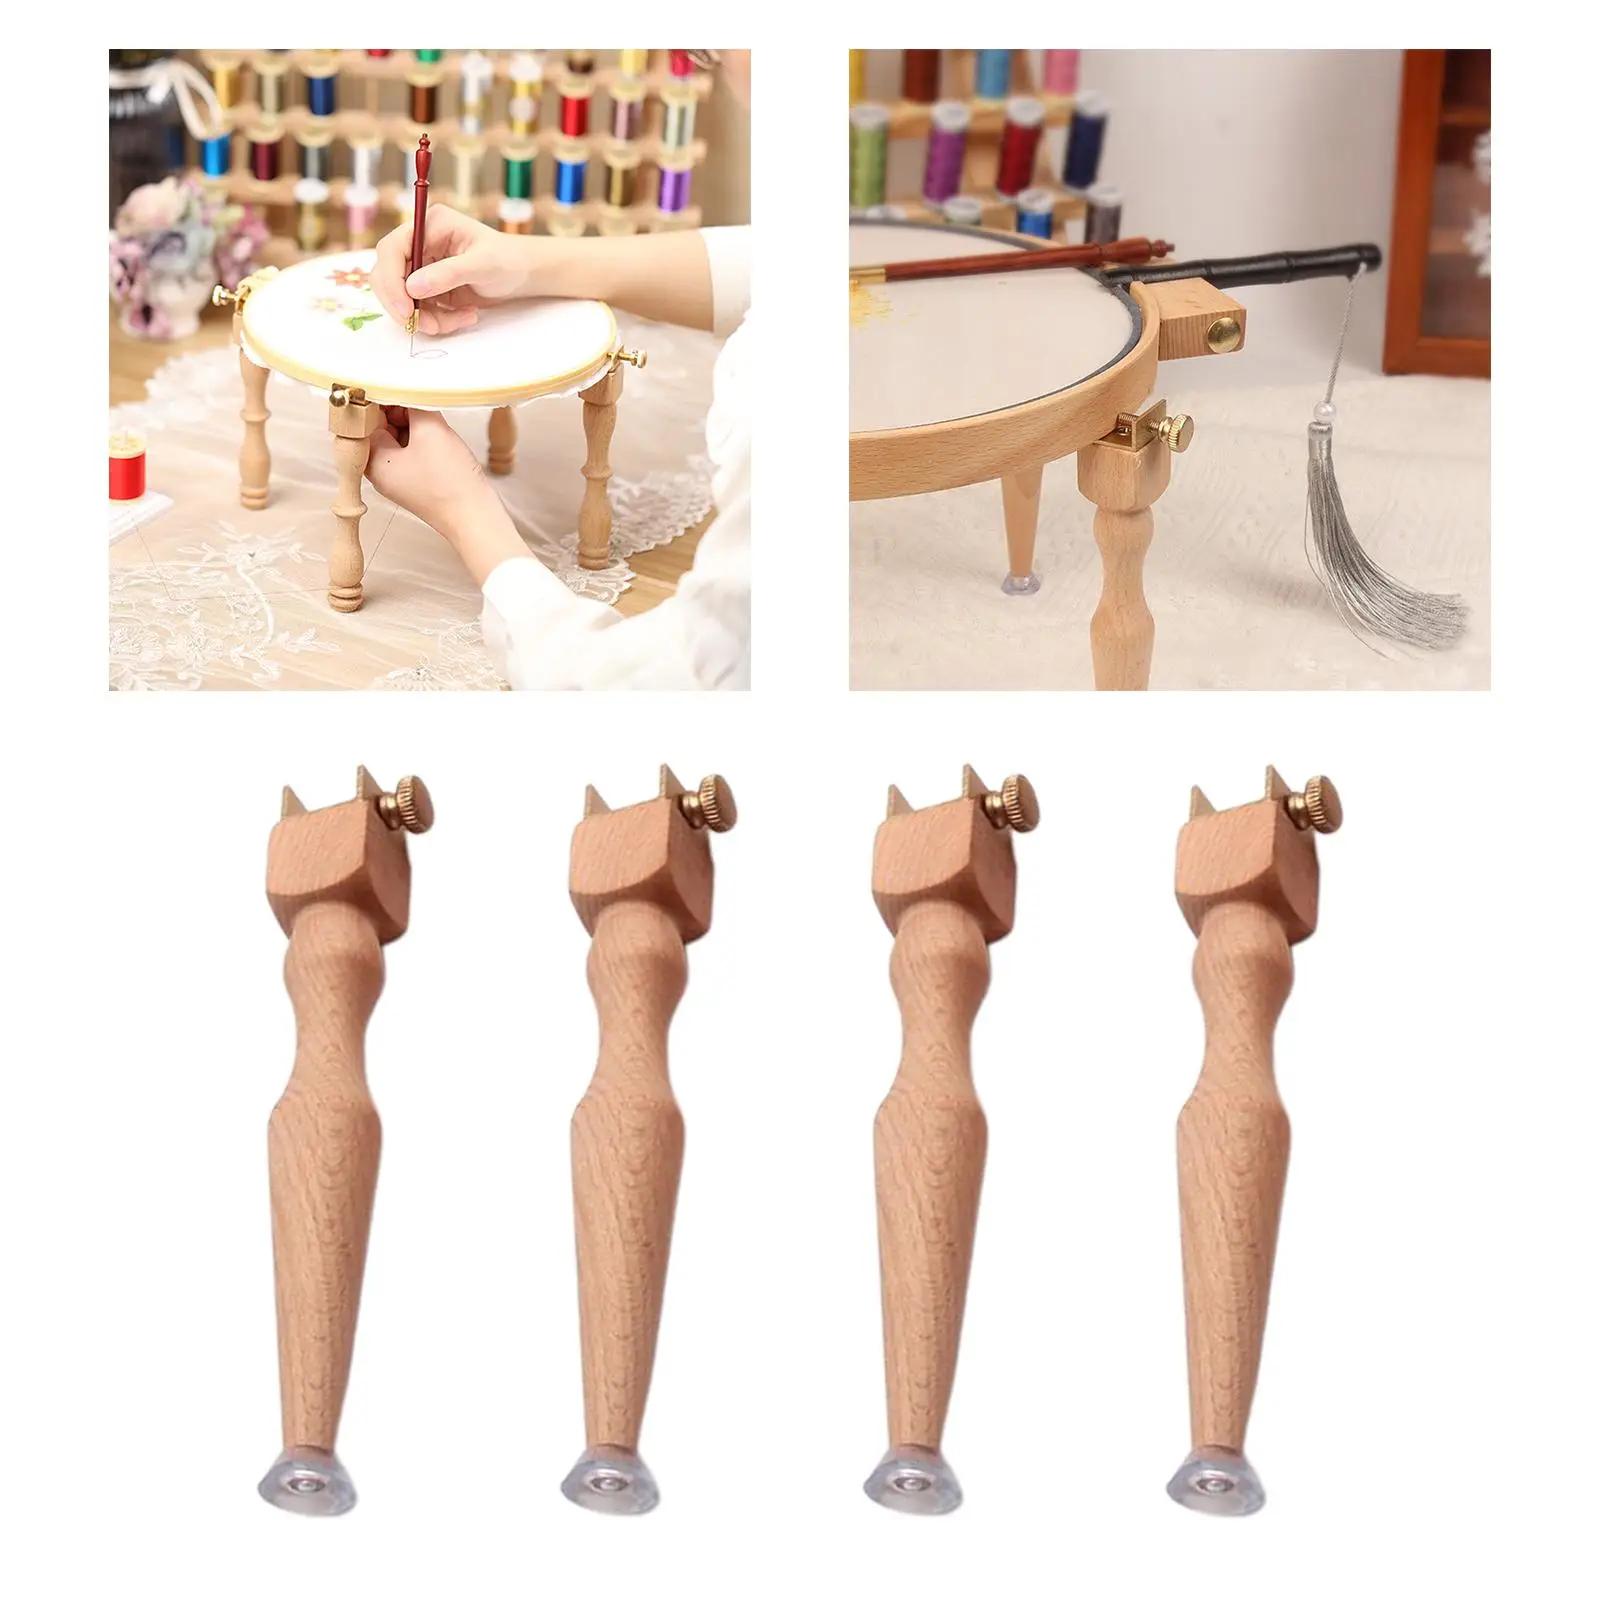 Adjustable Wooden Embroidery Hoop Stand Legs Set - 4Pcs - Embroidery Hoop Legs Supplies for Sewing